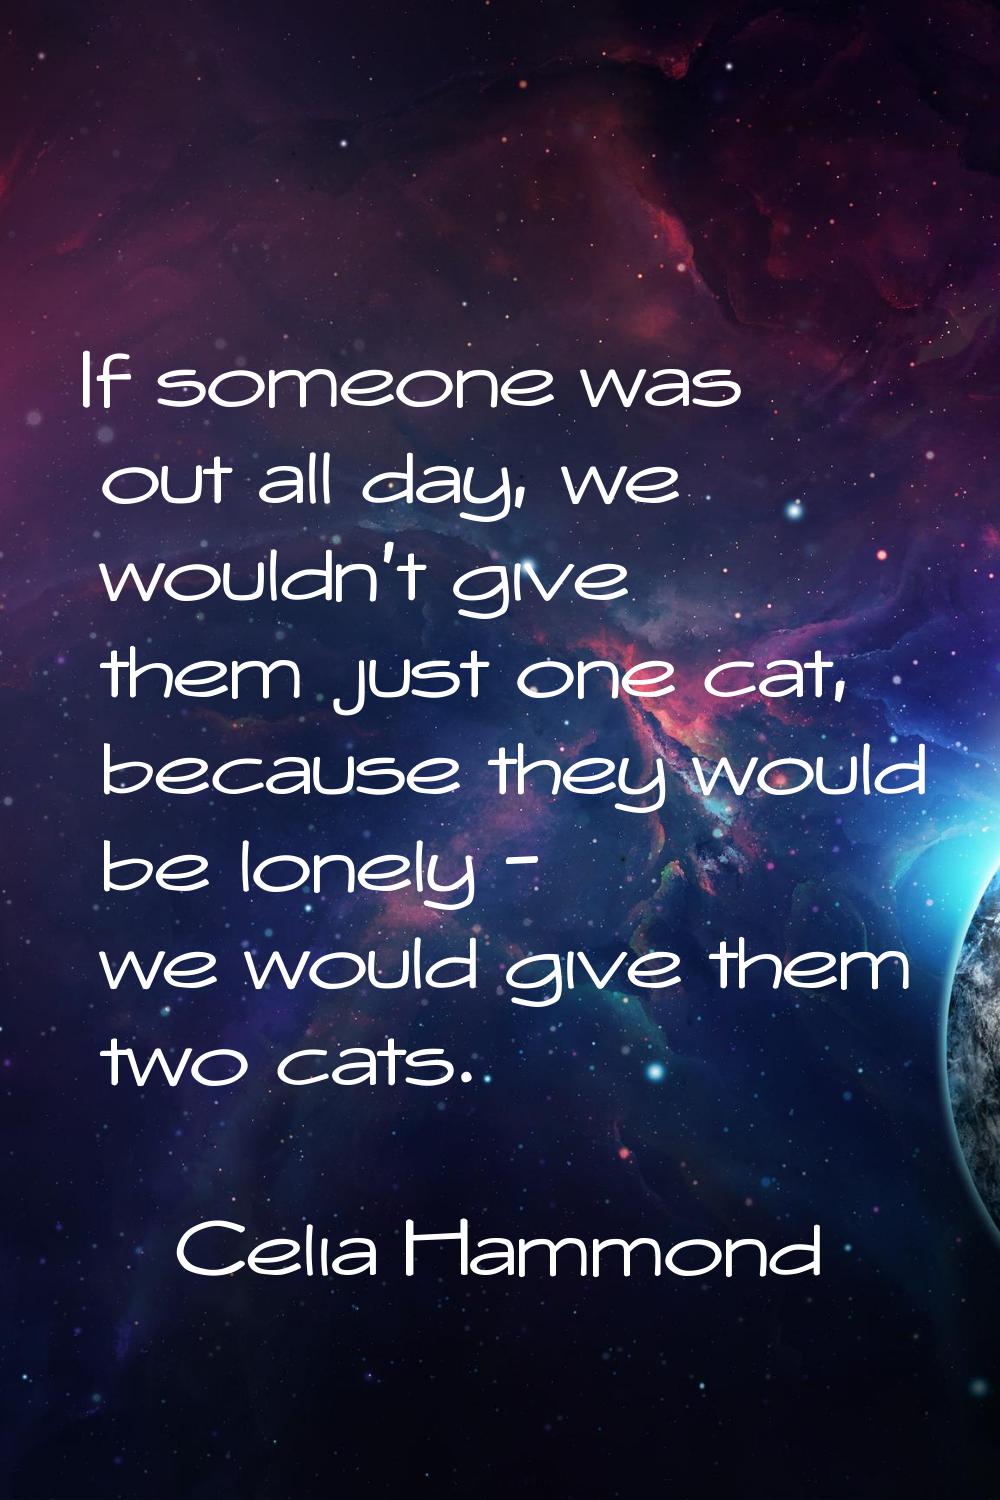 If someone was out all day, we wouldn't give them just one cat, because they would be lonely - we w